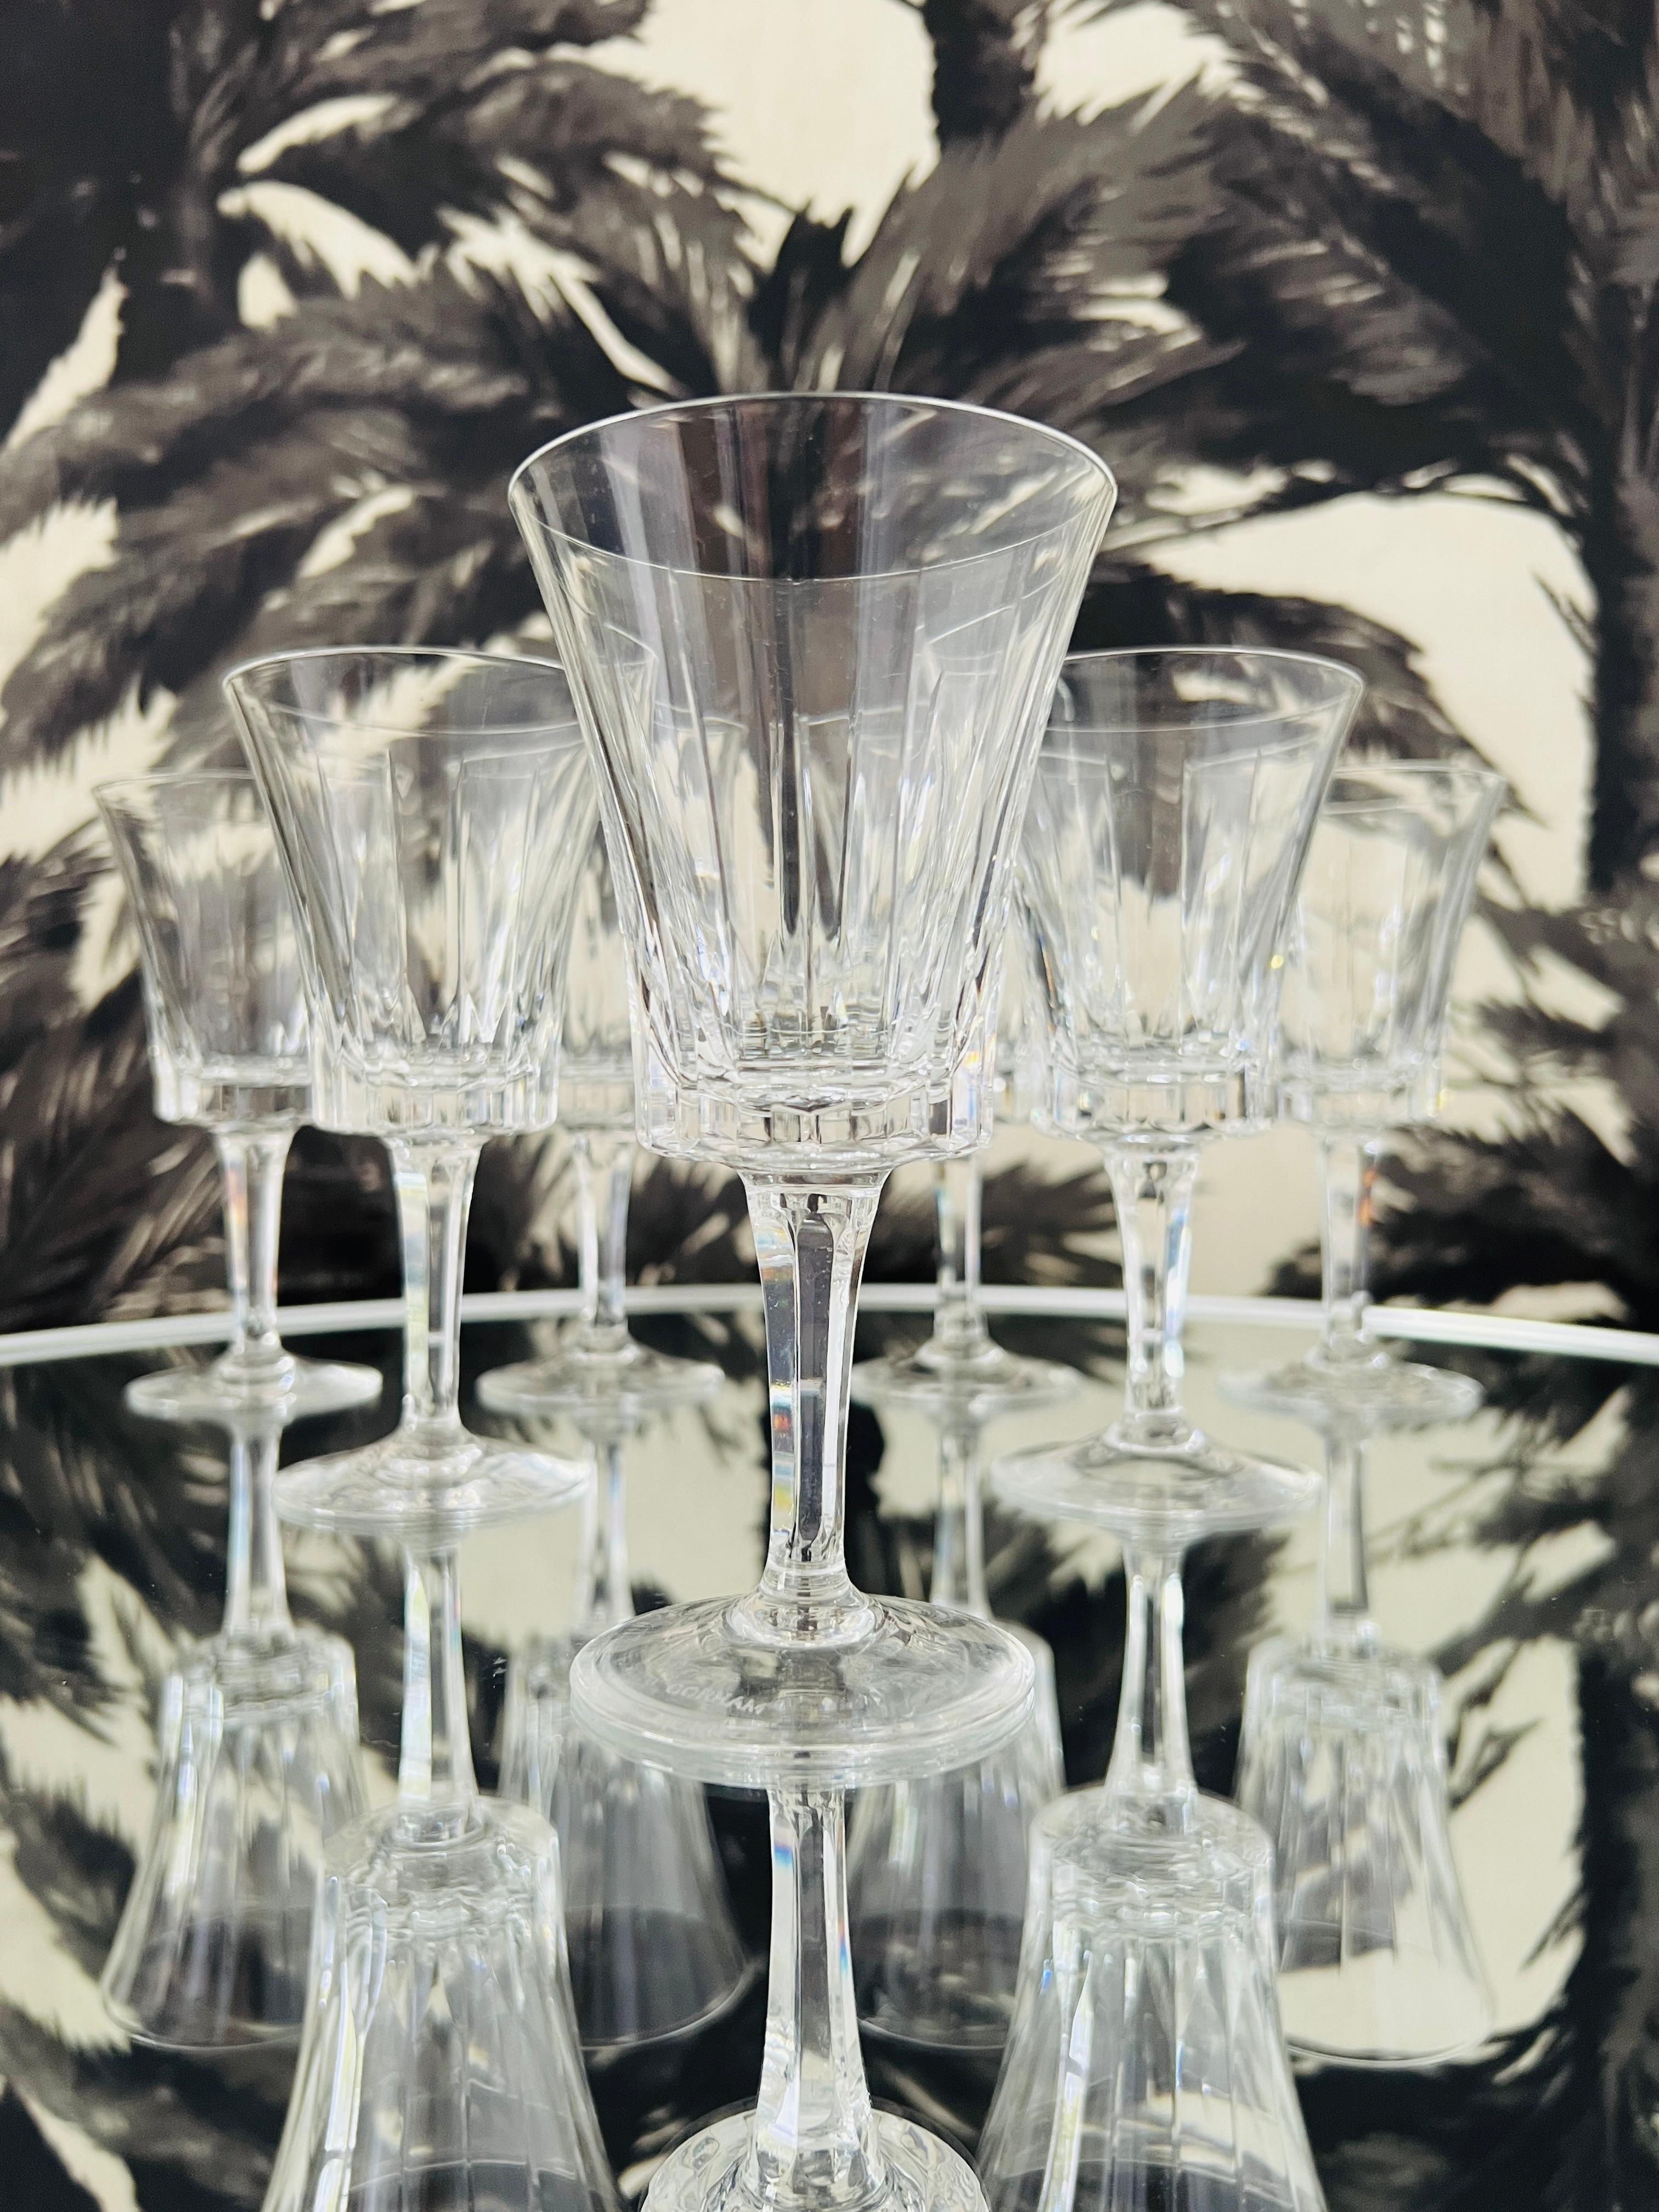 Vintage set of crystal stemware by Gorham, c. 1970.  The elegant blown glass wine goblets feature etched vertical cuts along the bowls and have faceted multi-sided stems which reflect like prisms.  The glasses have a beautiful weight to them and are